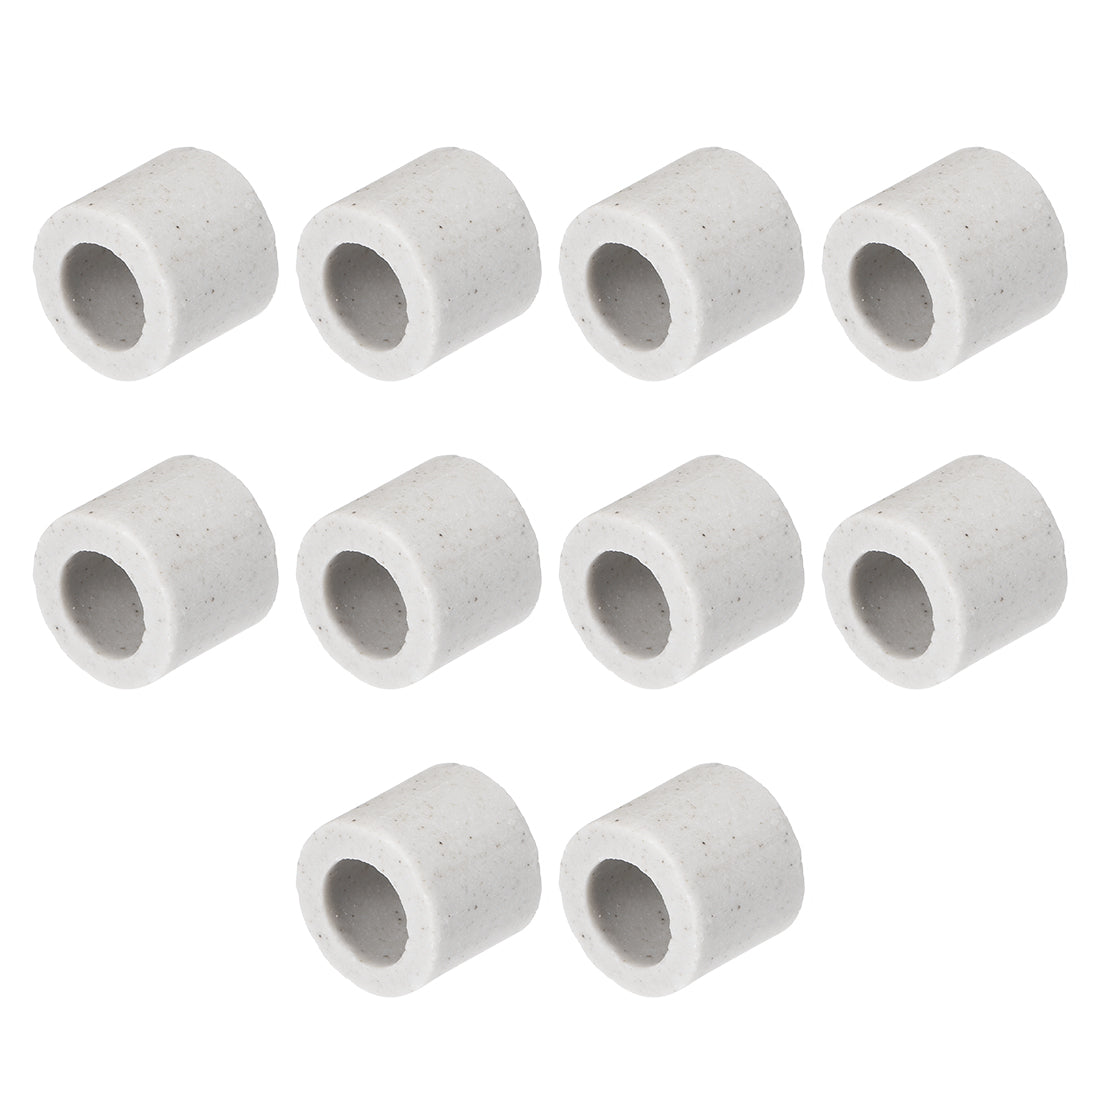 uxcell Uxcell 8mm Dia Ceramic Insulation Tube Single Bore Porcelain Insulator Pipe 10 Pcs